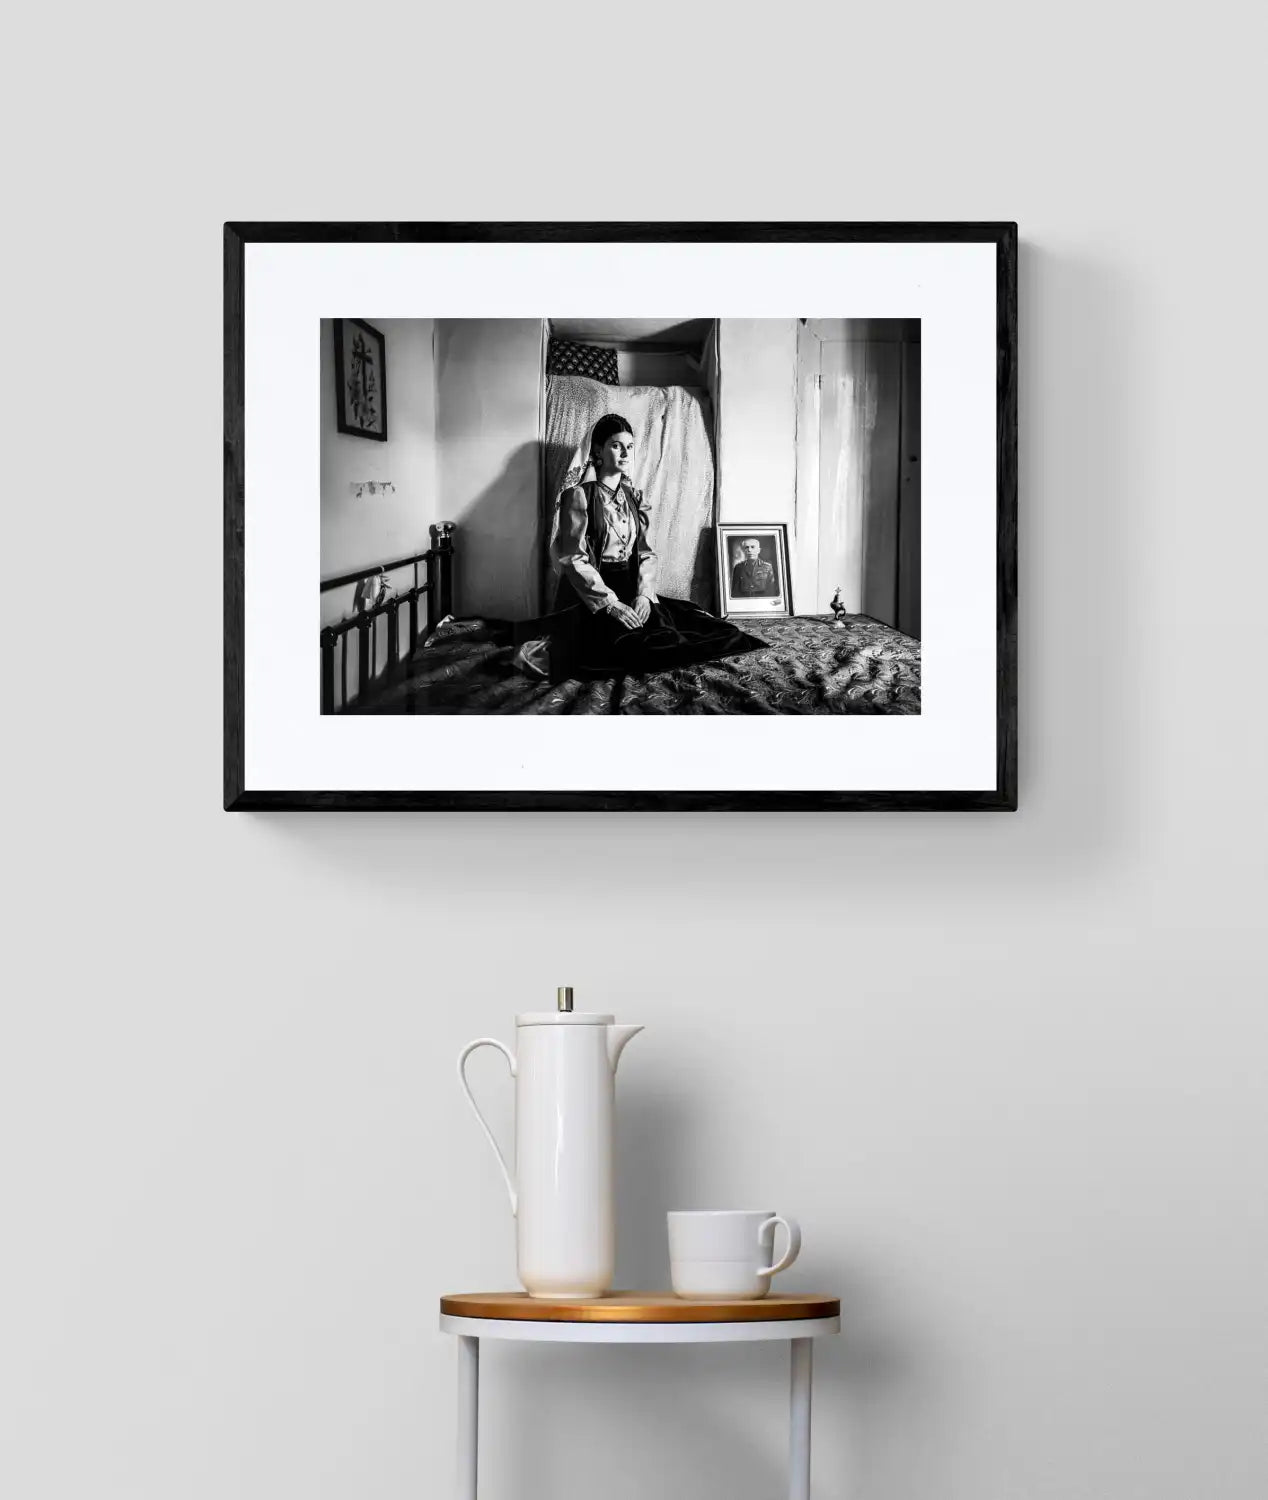 Black and White Photography Wall Art Greece | Costume of Platanos in a traditional local bedroom Nafpaktos Aetoloacarnanea Greece.